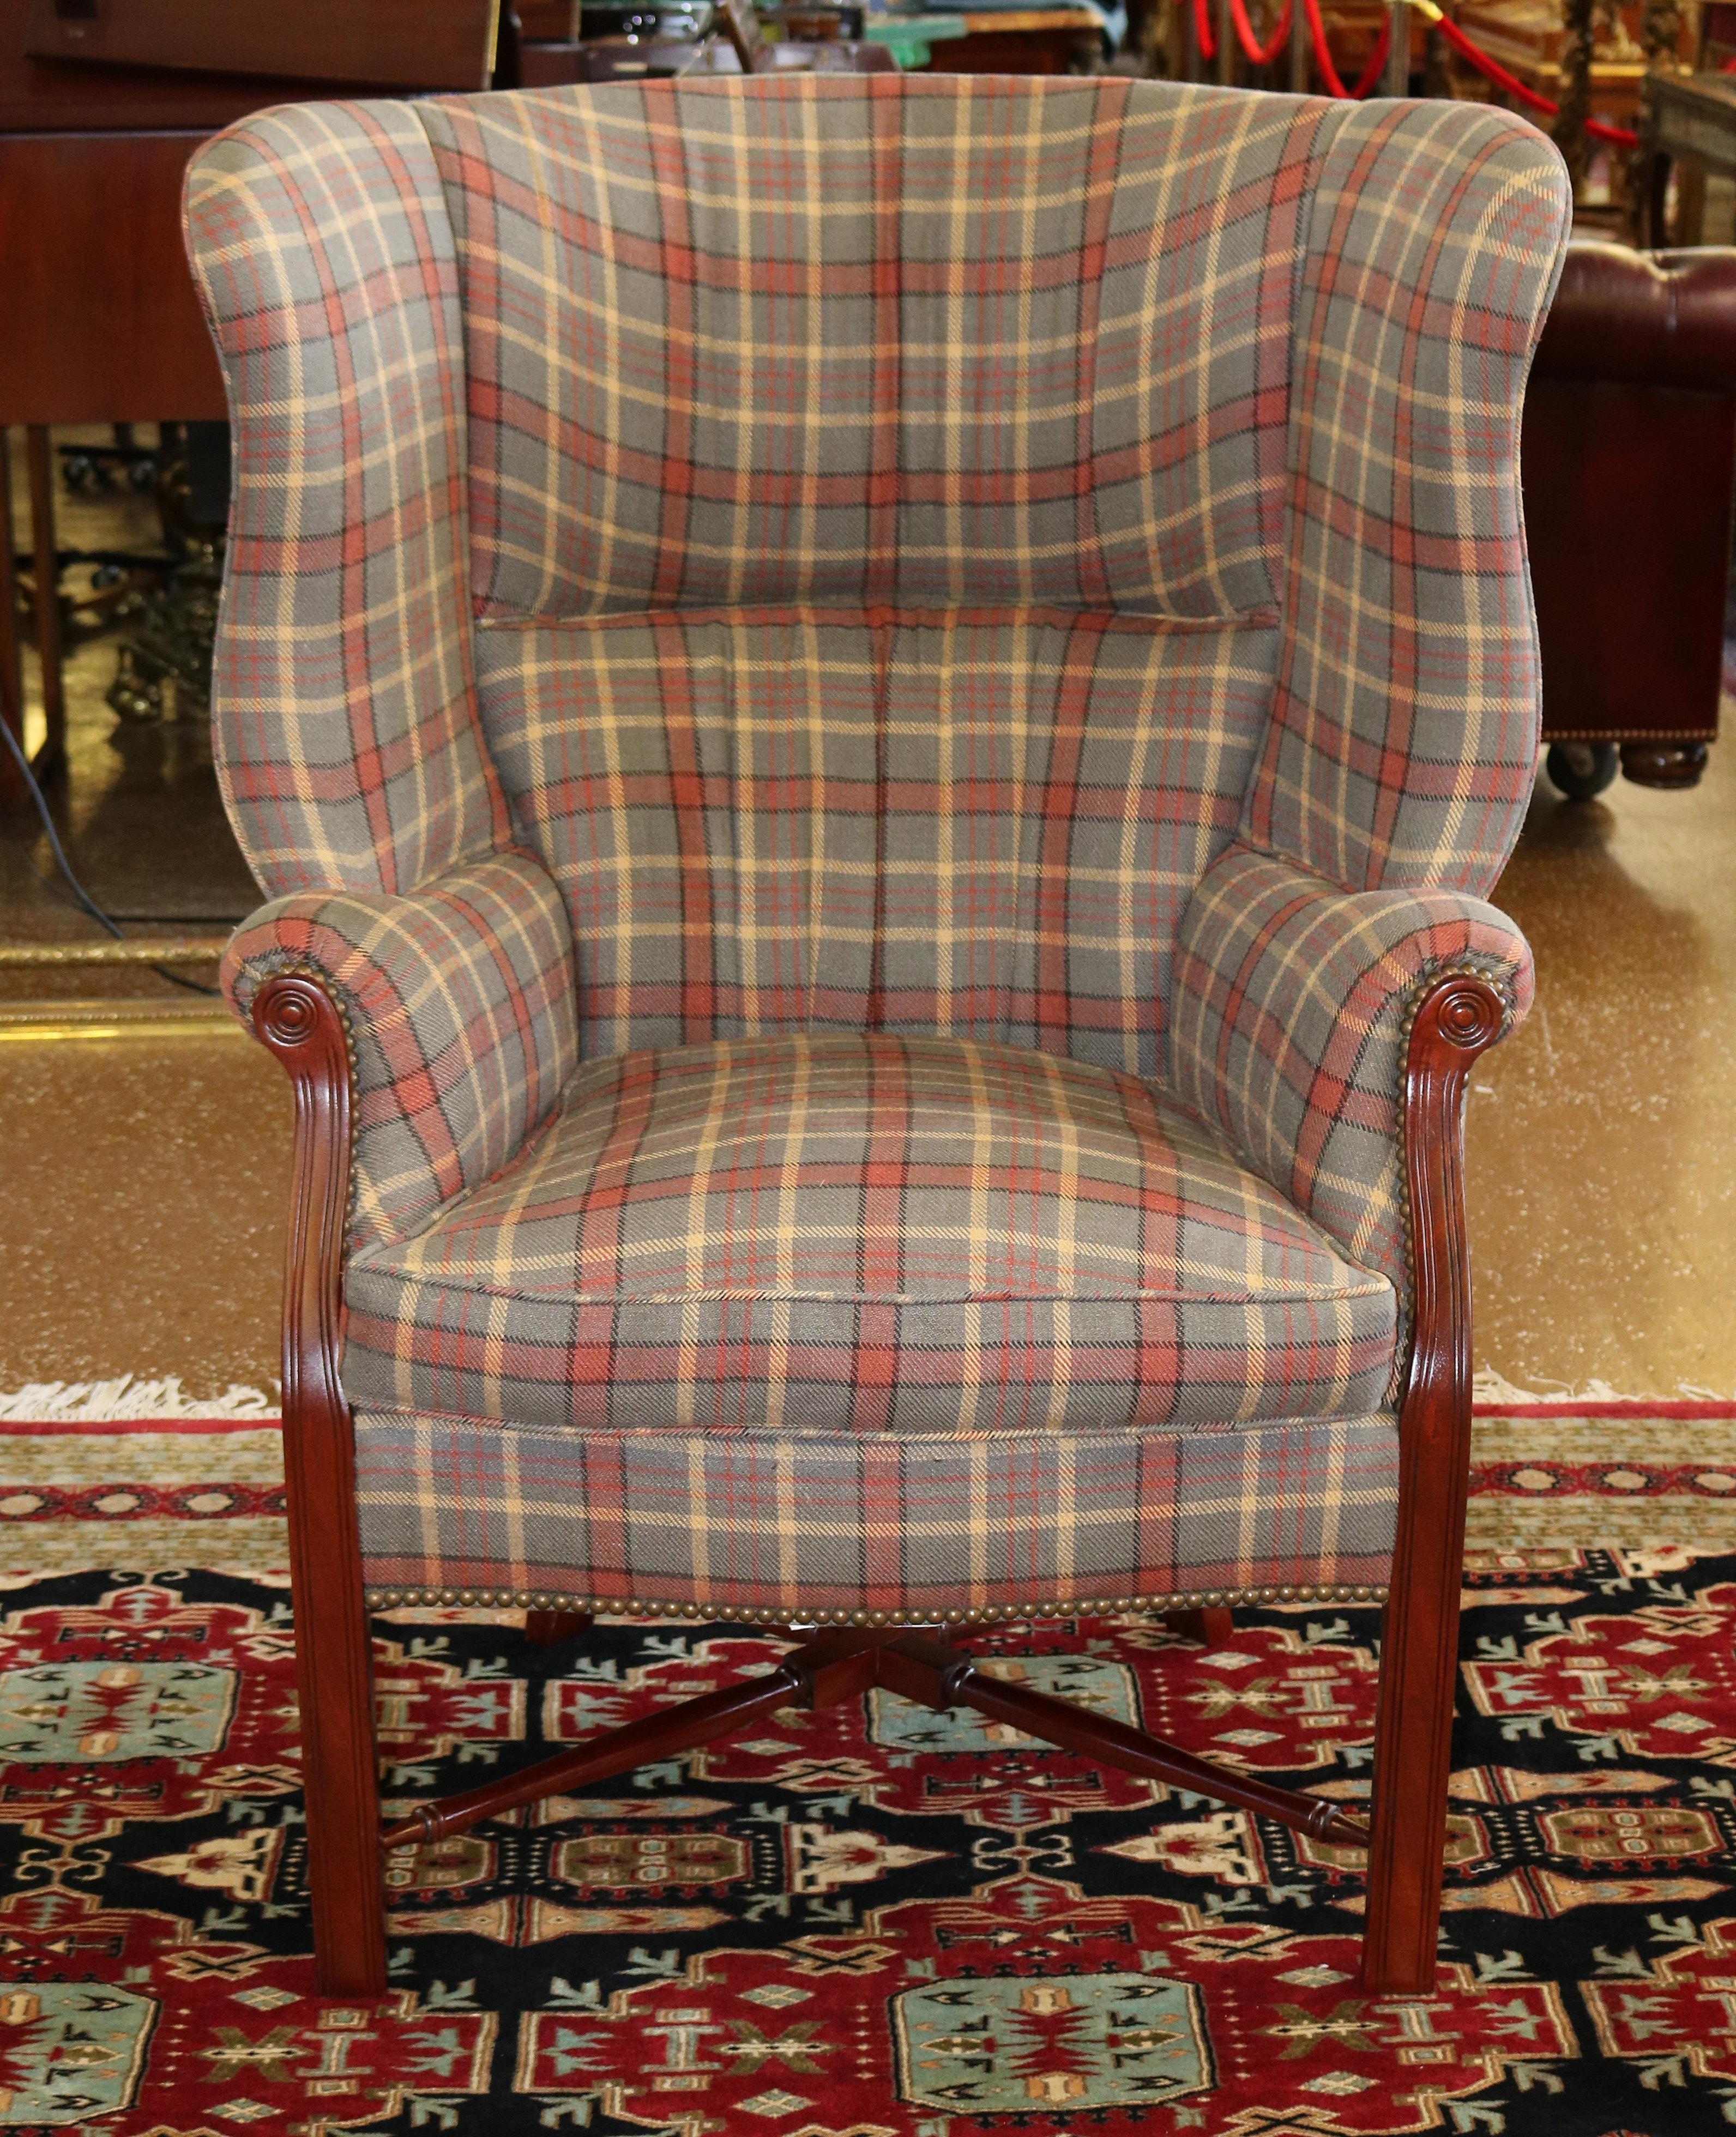 Theodore Alexander TRS Upholstery Mahogany Striped Fabric Fireside Wing Chair

Dimensions : 44